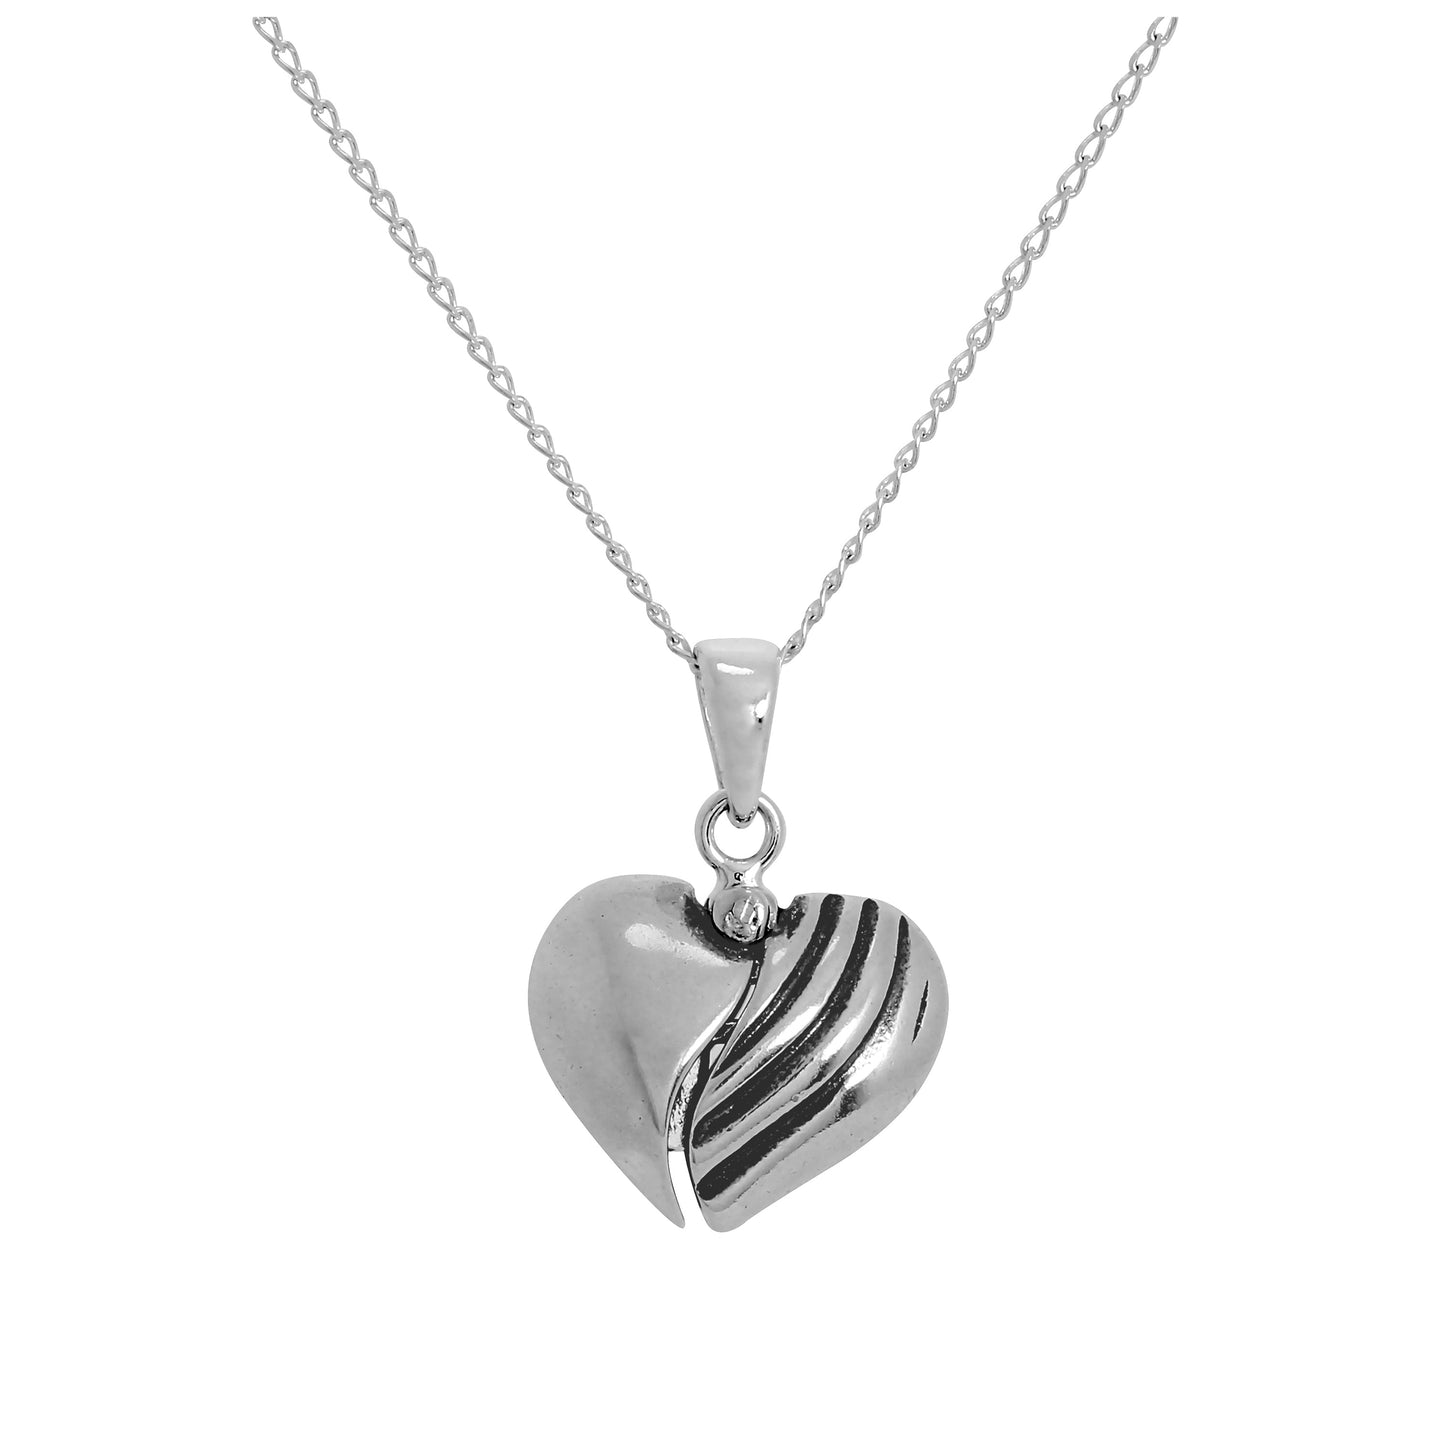 Sterling Silver Opening Heart Pendant with Musical Note Inside on Chain 14 - 32 Inches